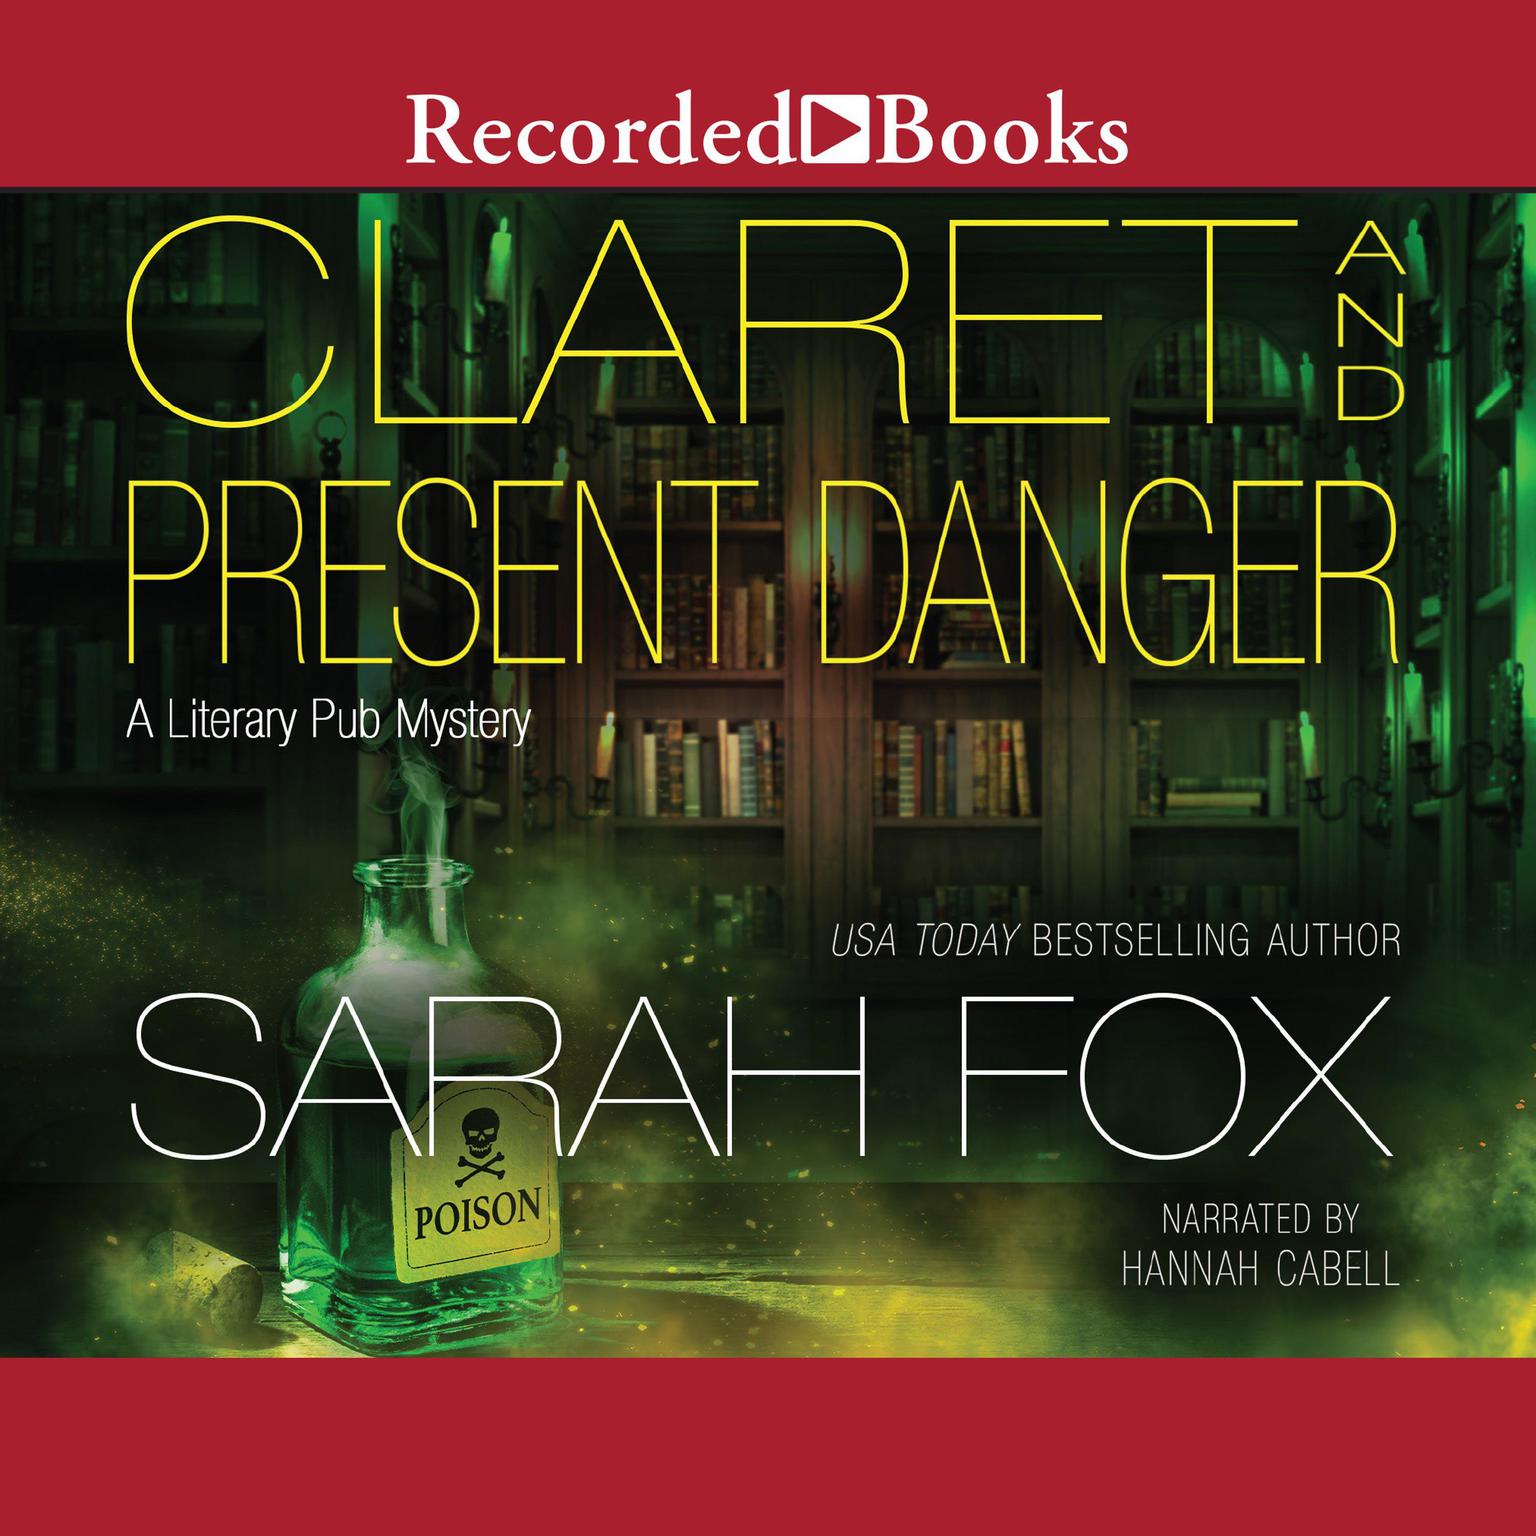 Claret and Present Danger Audiobook, by Sarah Fox